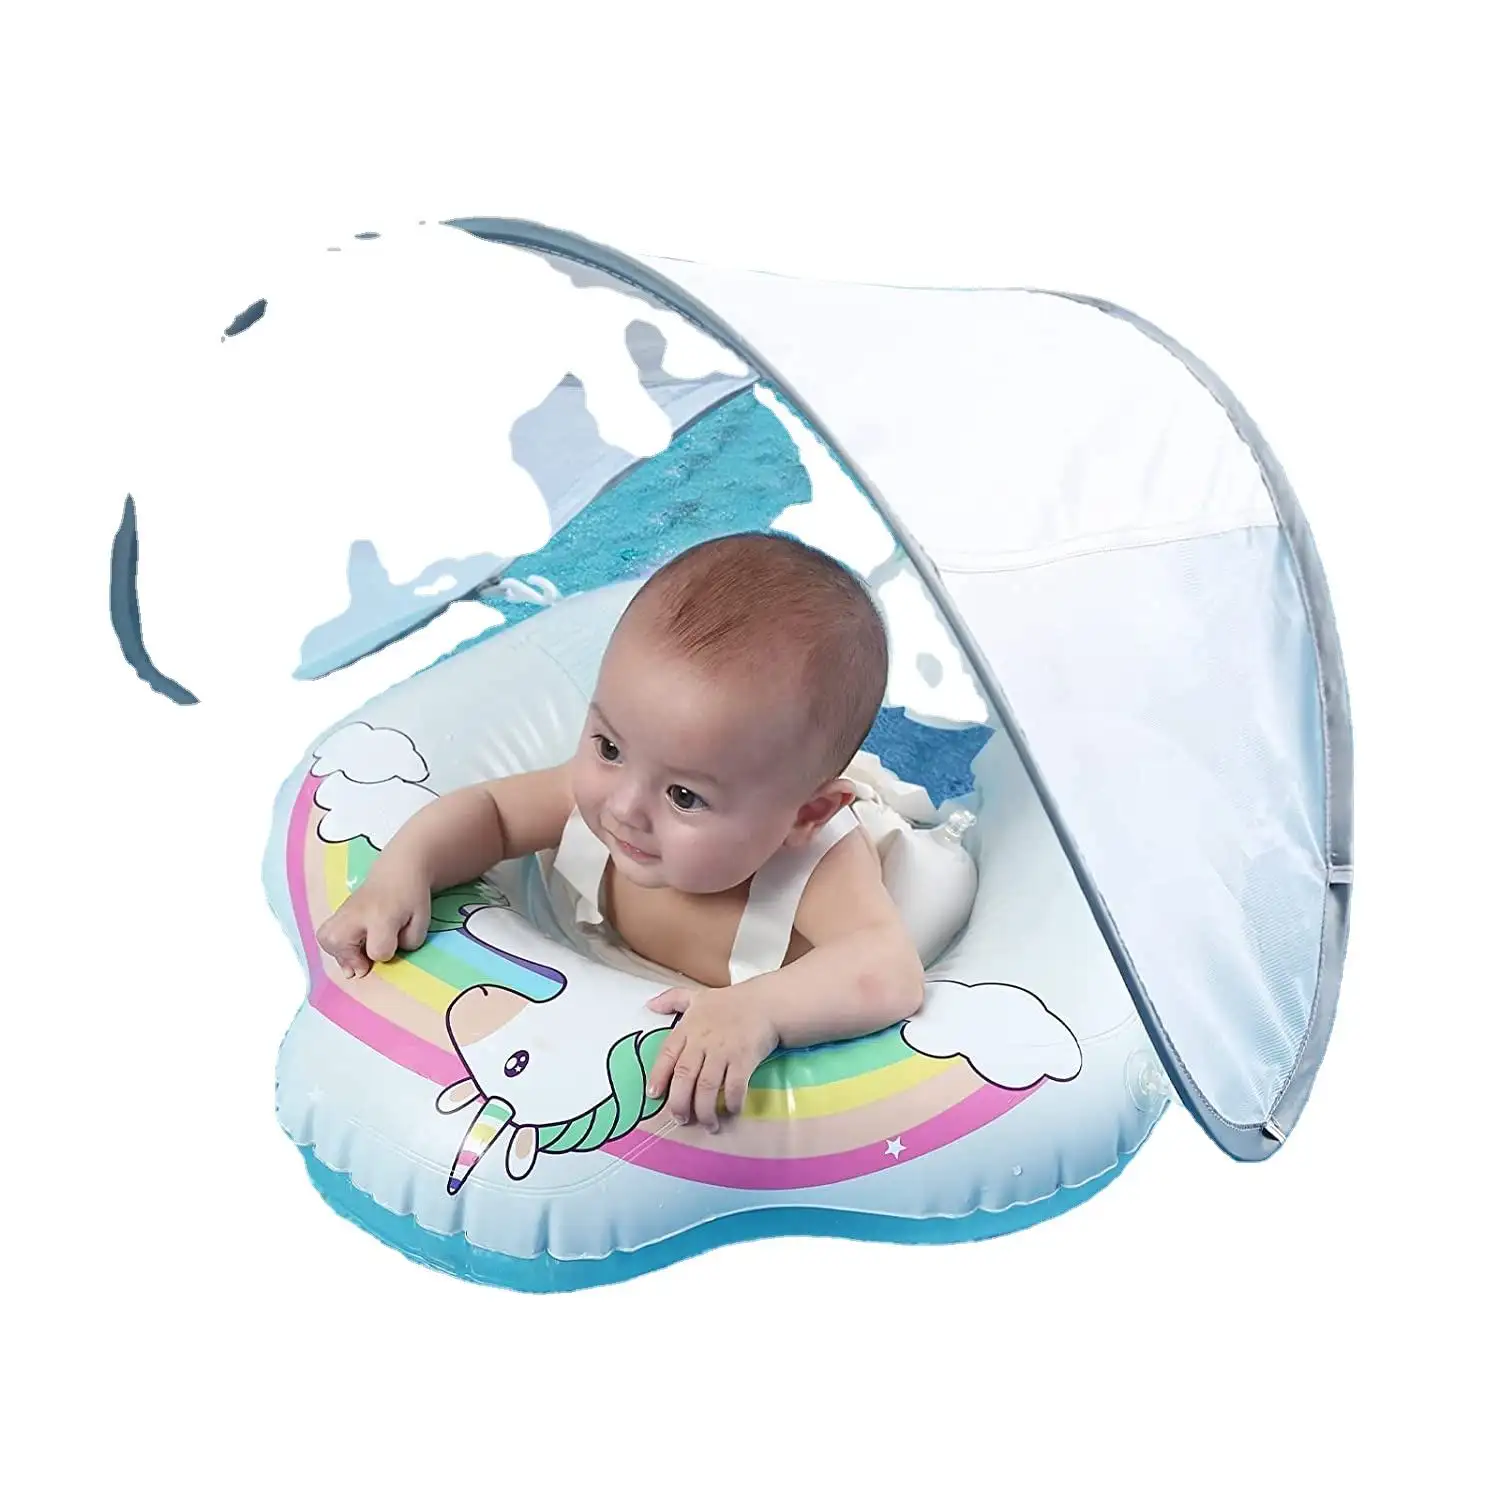 Unicorn Baby Swimming Floats Trainer for Toddlers Inflatable Baby Pool Floats Ring Swimming Float with Sun Protection Canopy